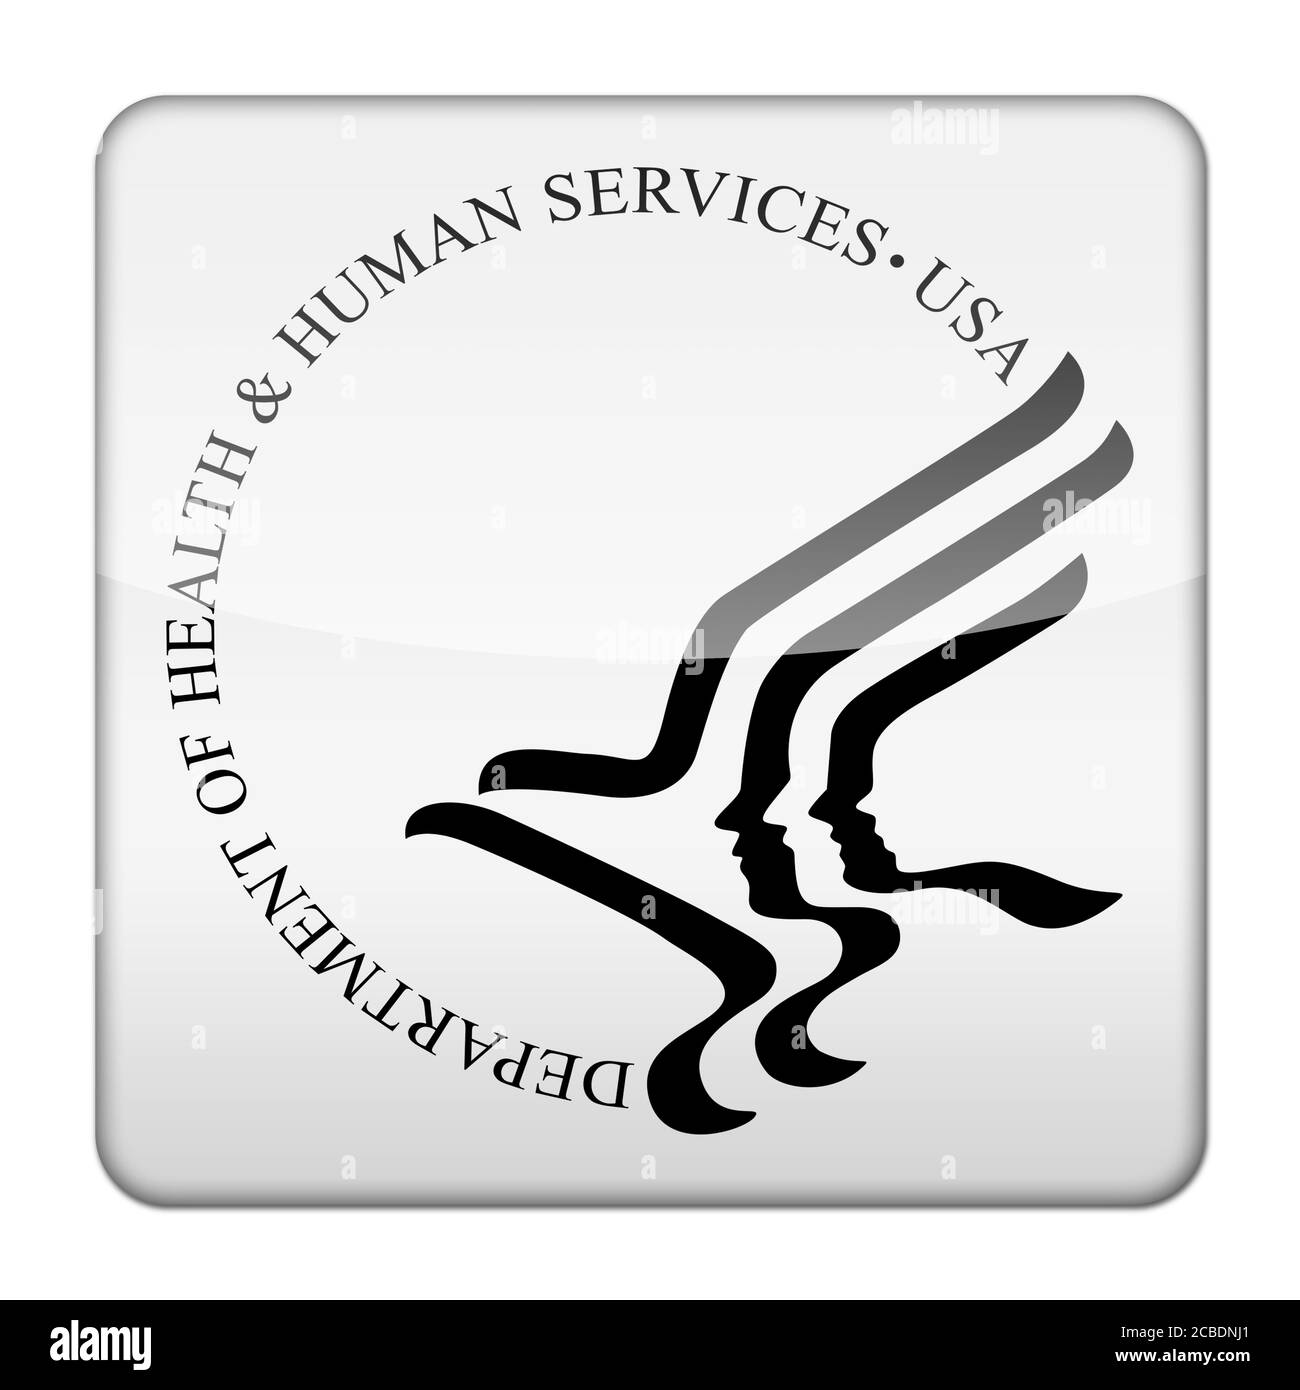 United States Department of Health and Human Services Stockfoto